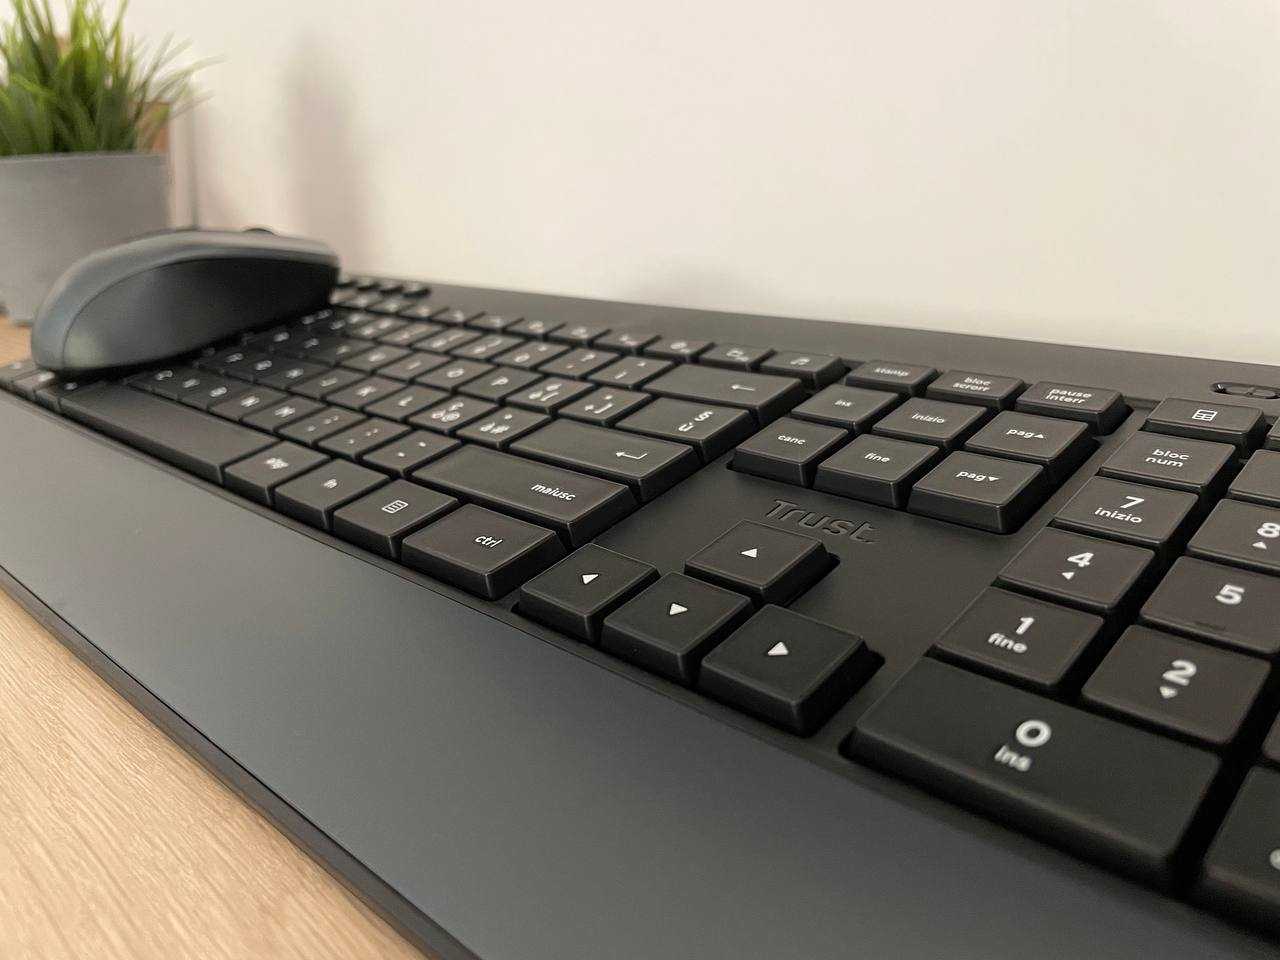 Trust Trezo review: The ideal wireless keyboard and mouse kit for the office